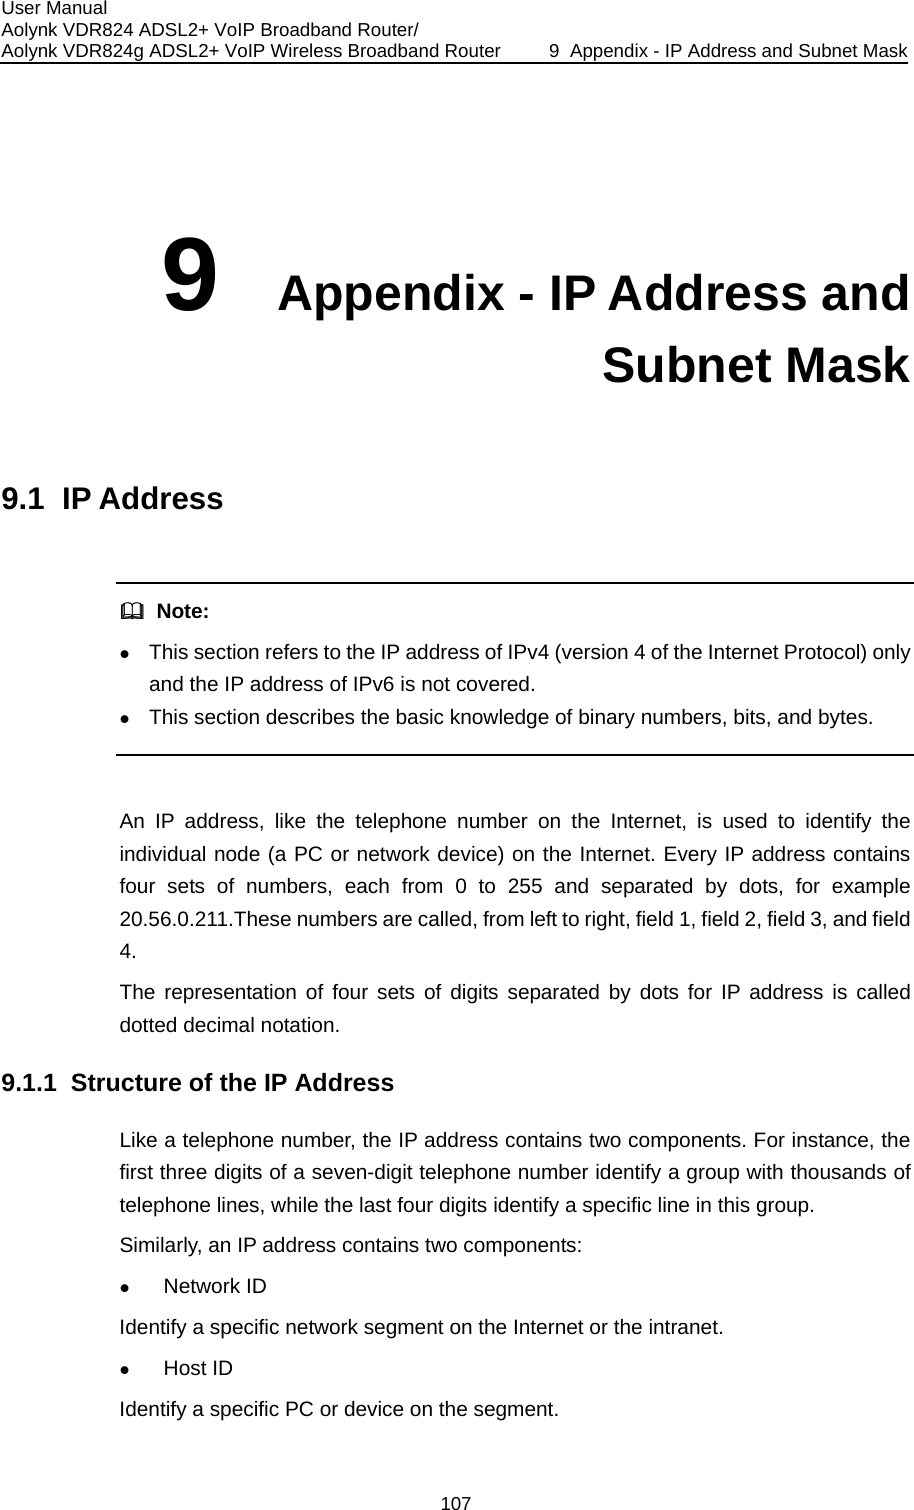 User Manual Aolynk VDR824 ADSL2+ VoIP Broadband Router/ Aolynk VDR824g ADSL2+ VoIP Wireless Broadband Router  9  Appendix - IP Address and Subnet Mask 107 9  Appendix - IP Address and Subnet Mask 9.1  IP Address    Note: z This section refers to the IP address of IPv4 (version 4 of the Internet Protocol) only and the IP address of IPv6 is not covered. z This section describes the basic knowledge of binary numbers, bits, and bytes.  An IP address, like the telephone number on the Internet, is used to identify the individual node (a PC or network device) on the Internet. Every IP address contains four sets of numbers, each from 0 to 255 and separated by dots, for example 20.56.0.211.These numbers are called, from left to right, field 1, field 2, field 3, and field 9.1.1  Struontains two components. For instance, the identify a group with thousands of Simi ddress contains two components: z Iden rnet or the intranet. z 4. The representation of four sets of digits separated by dots for IP address is called dotted decimal notation. cture of the IP Address Like a telephone number, the IP address cfirst three digits of a seven-digit telephone number telephone lines, while the last four digits identify a specific line in this group.  larly, an IP aNetwork ID tify a specific network segment on the InteHost ID Identify a specific PC or device on the segment. 